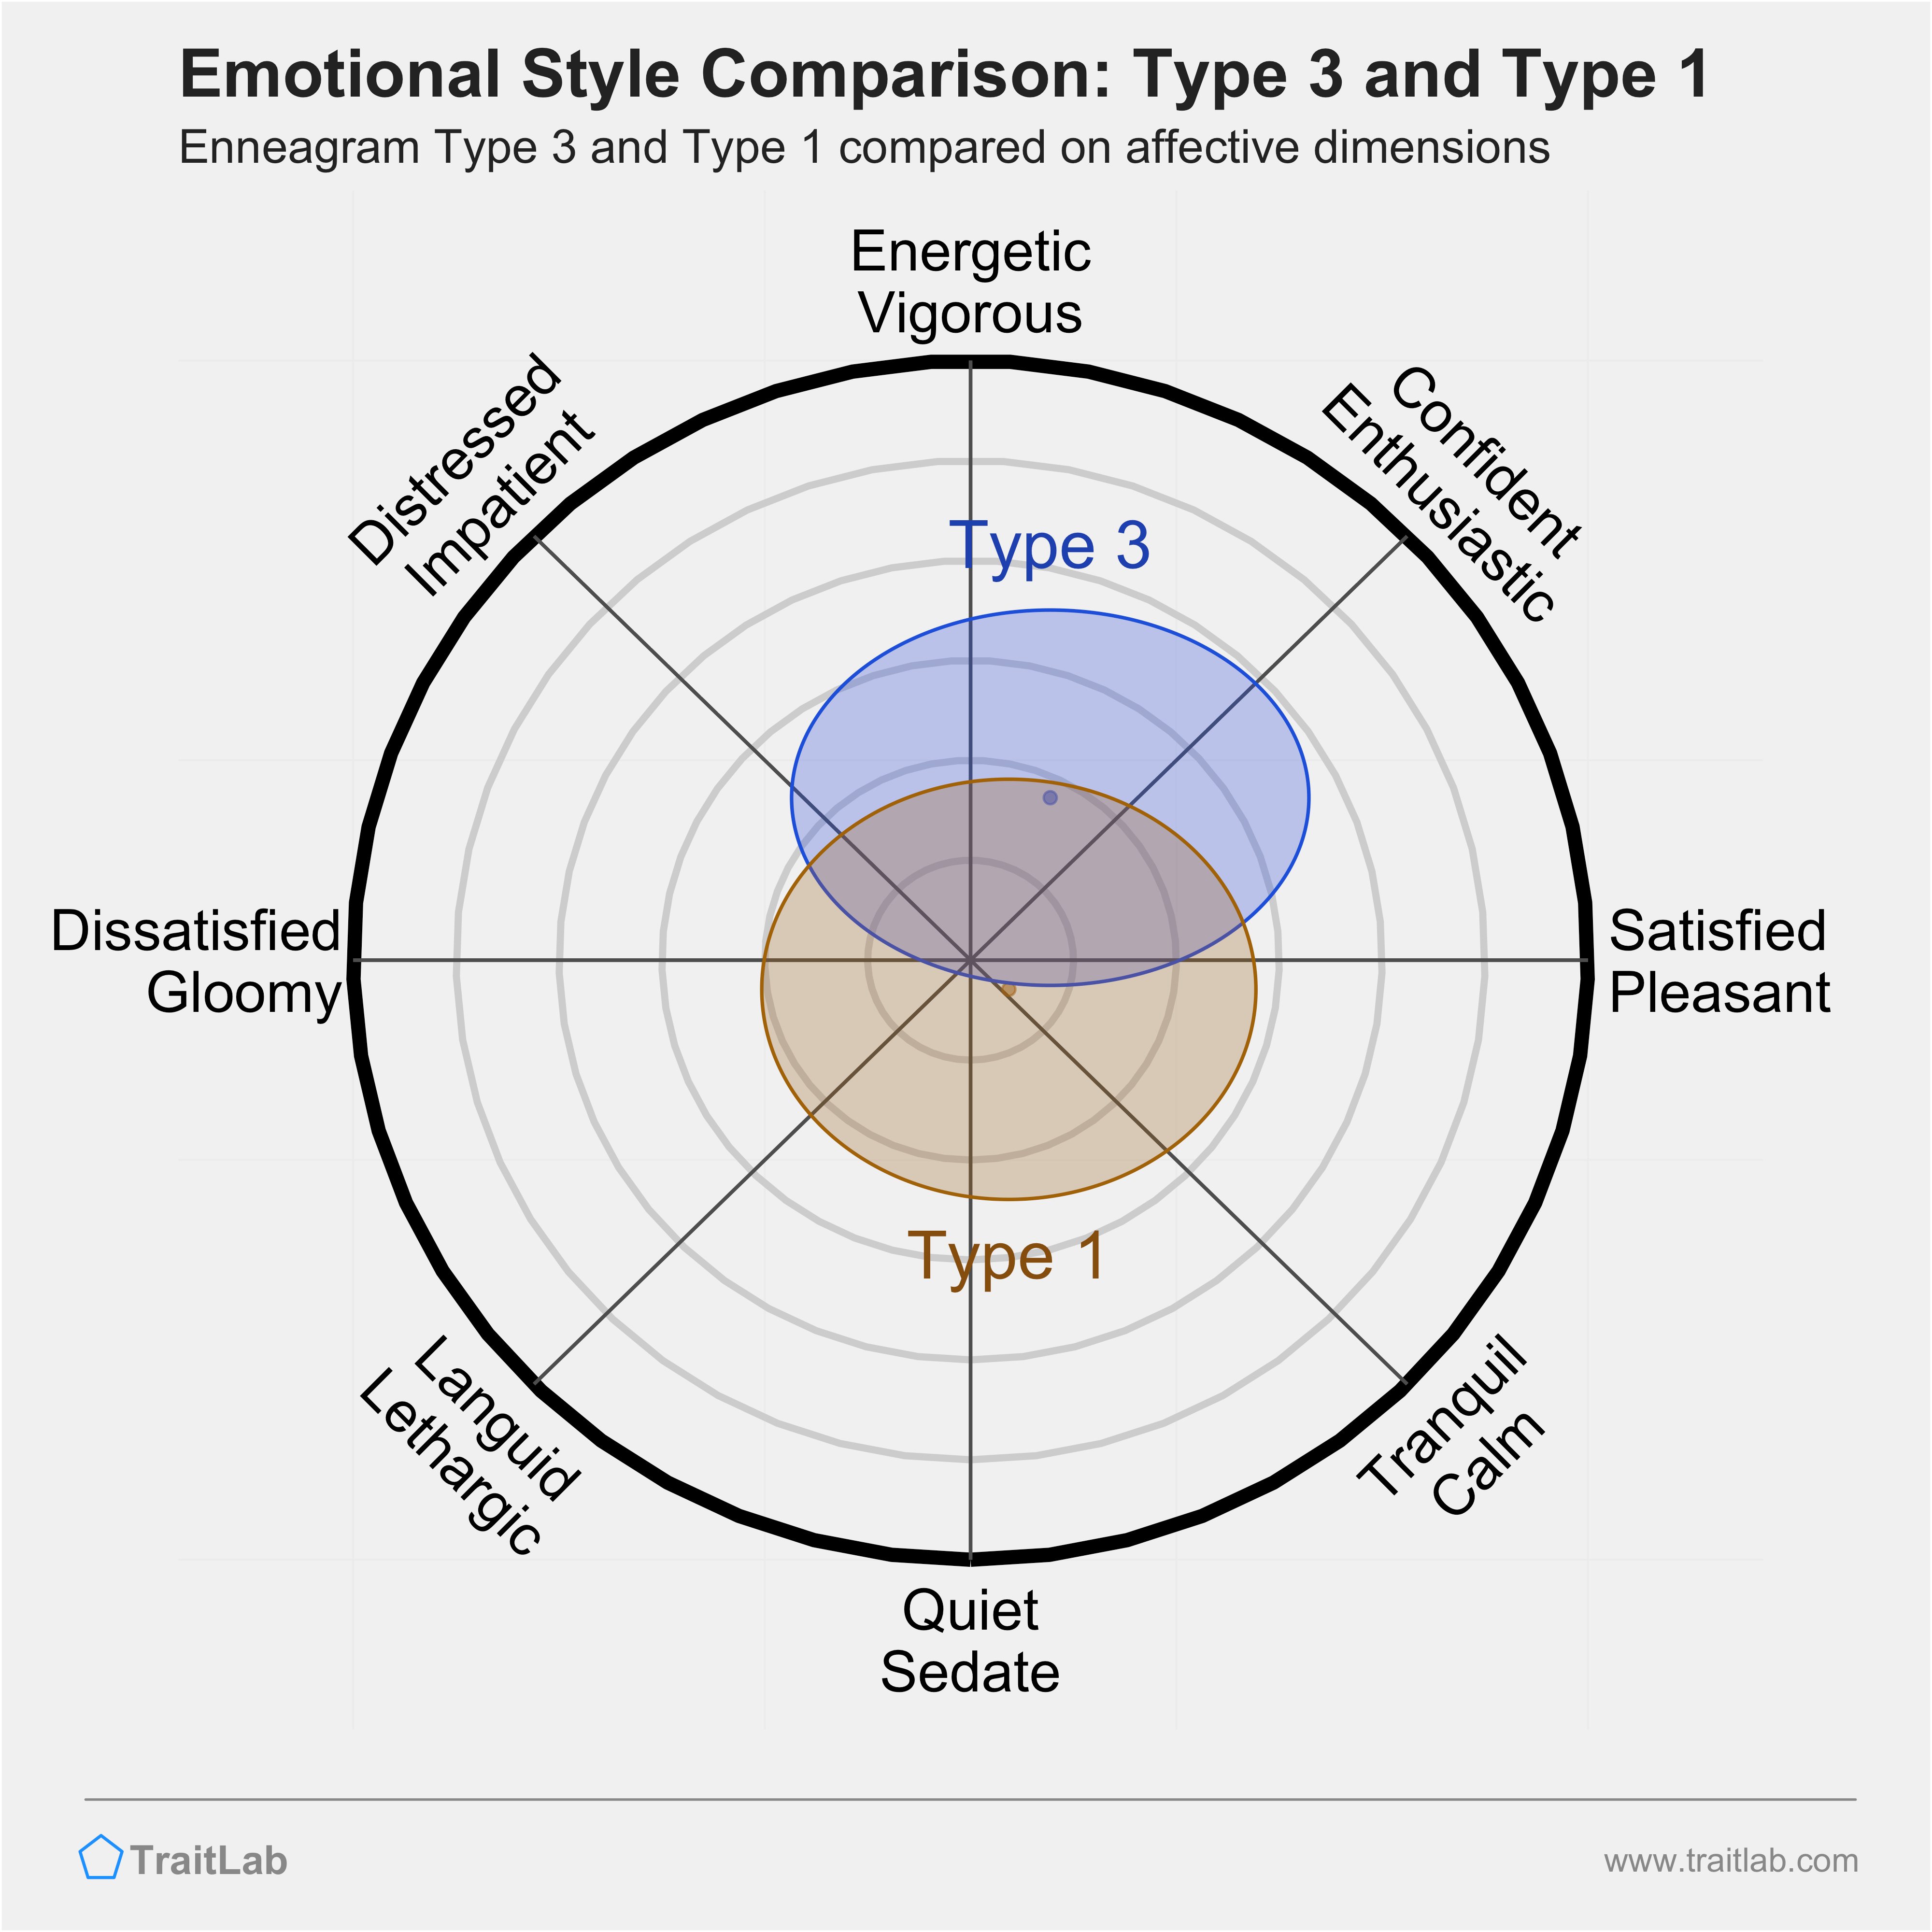 Type 3 and Type 1 comparison across emotional (affective) dimensions